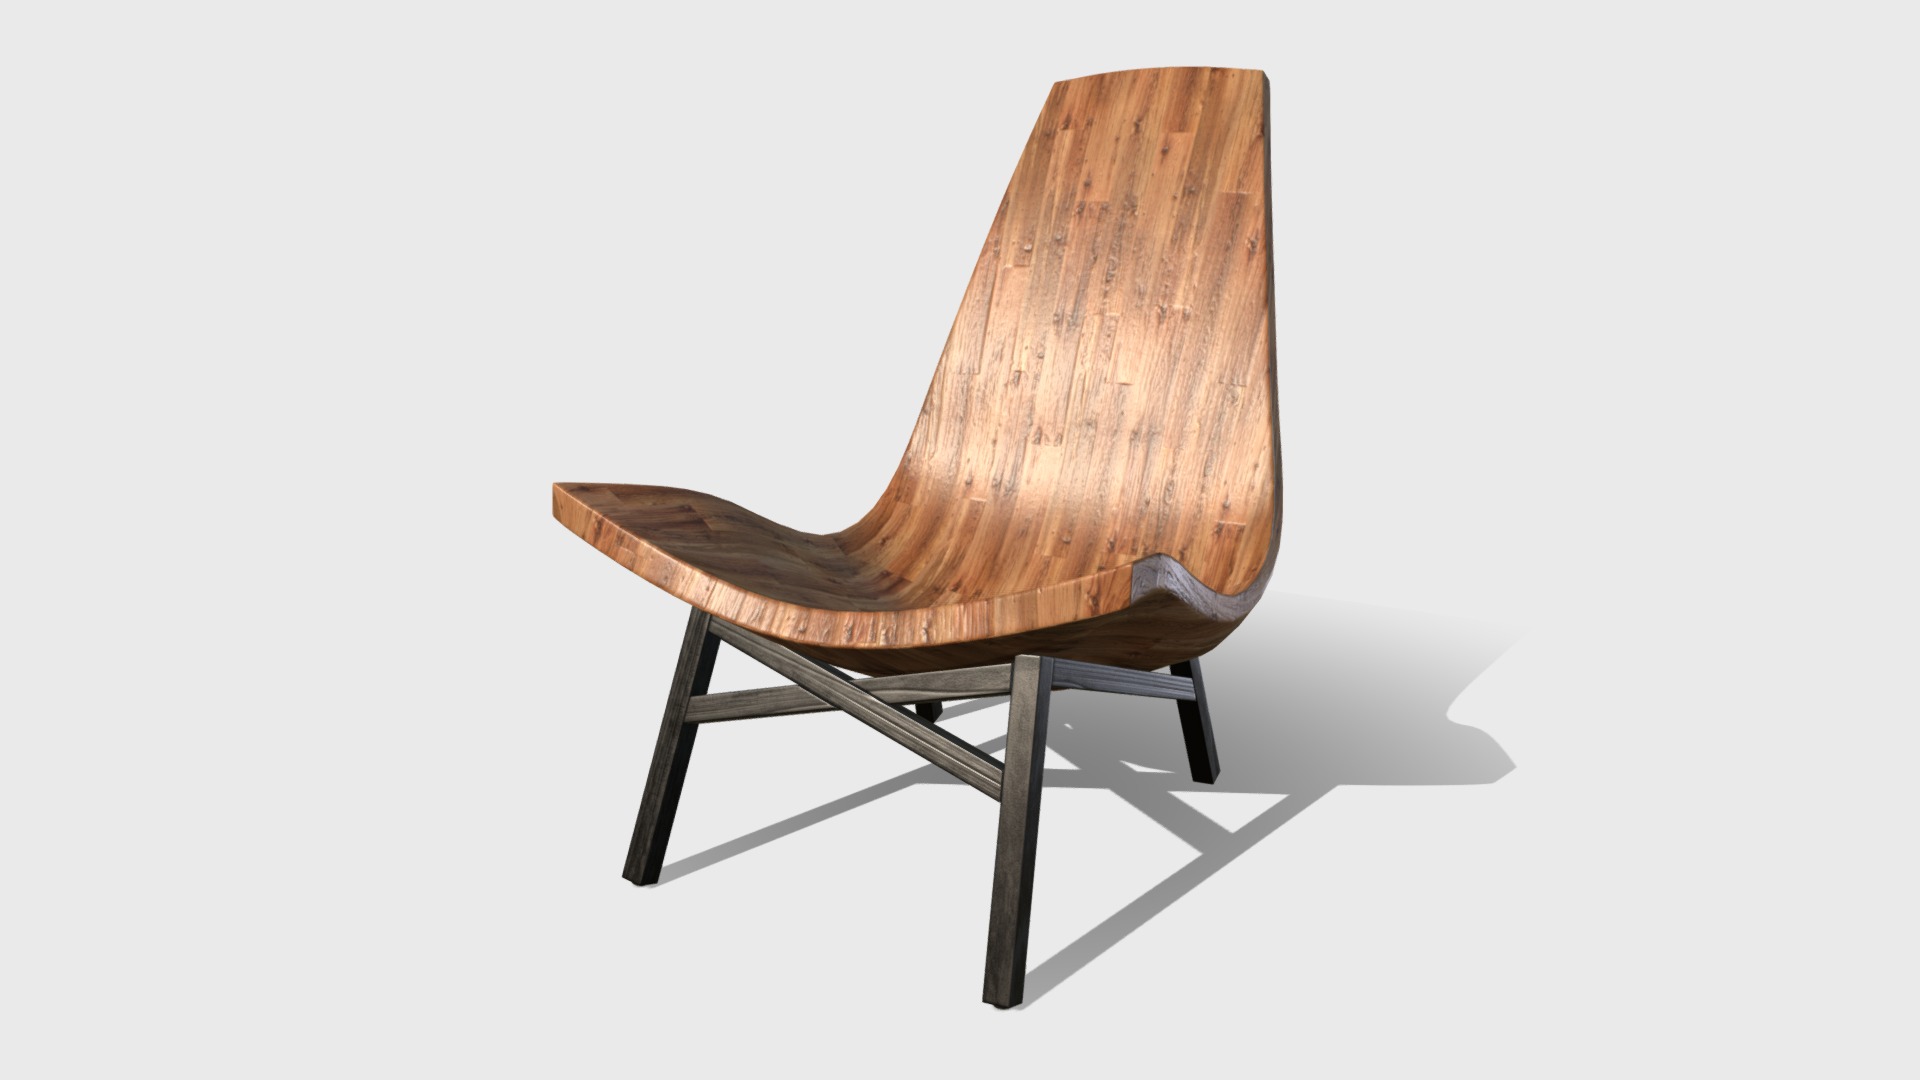 3D model American Modern Wooden Chair - This is a 3D model of the American Modern Wooden Chair. The 3D model is about a wooden chair on a white background.